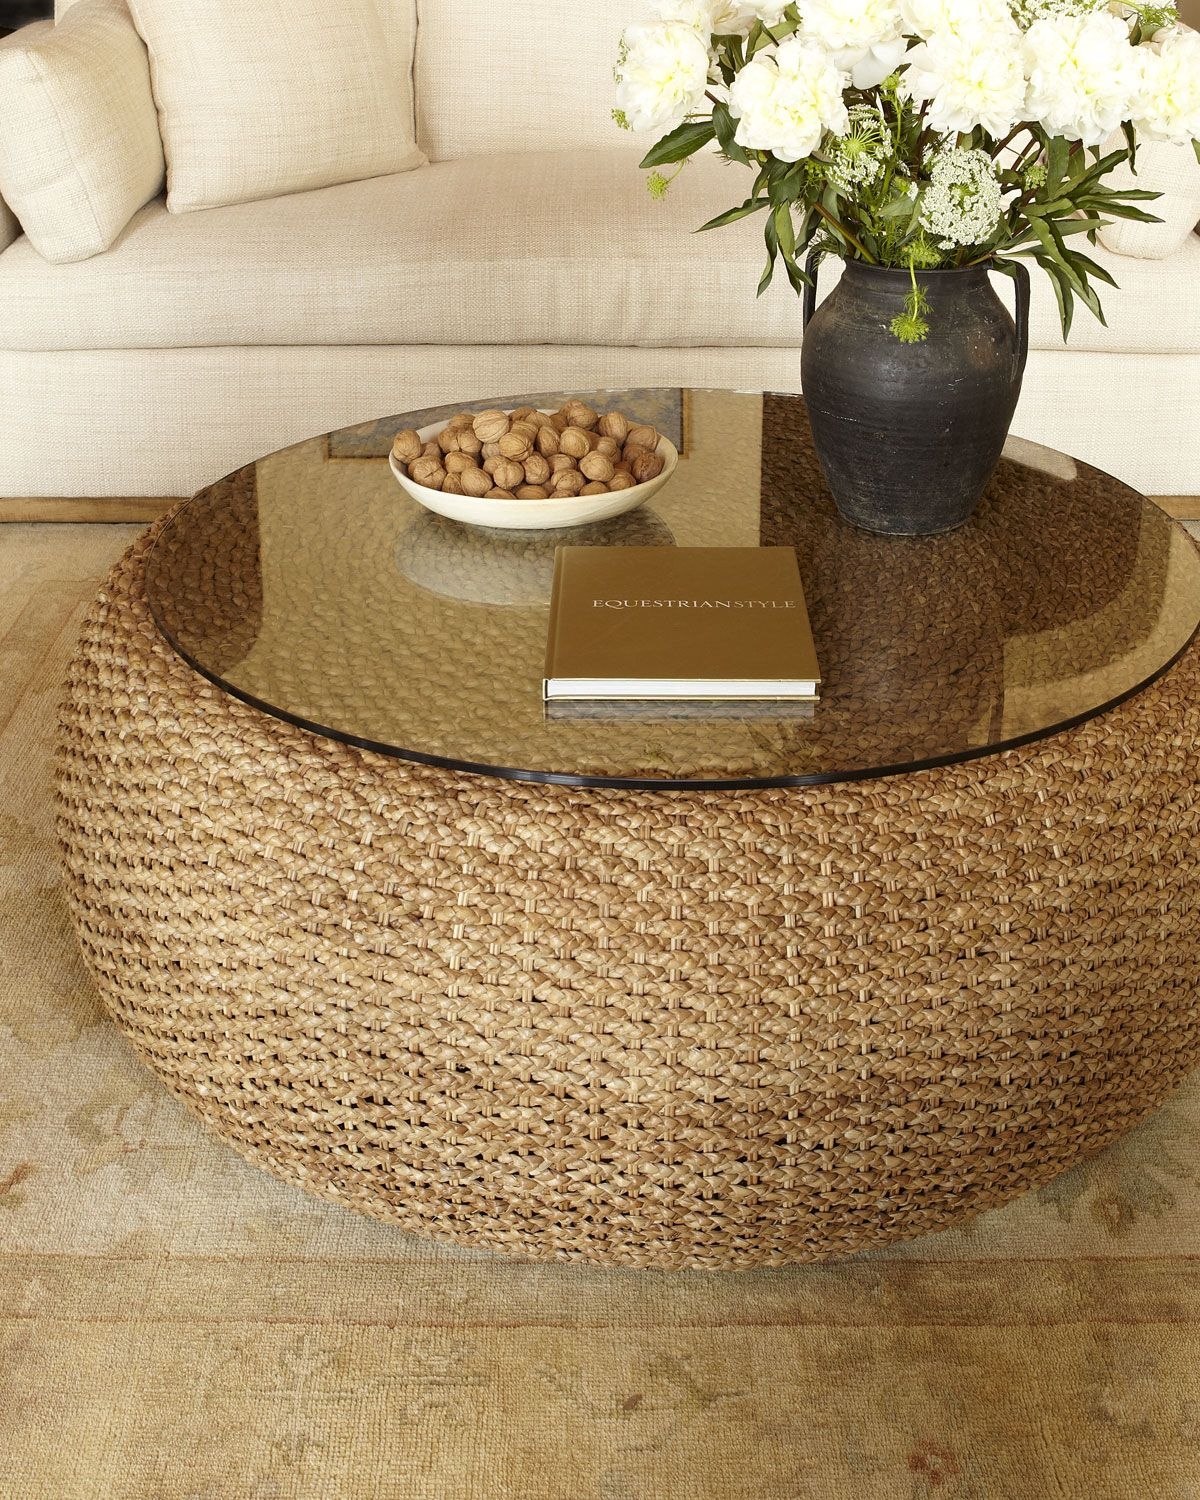 Seagrass coffee table